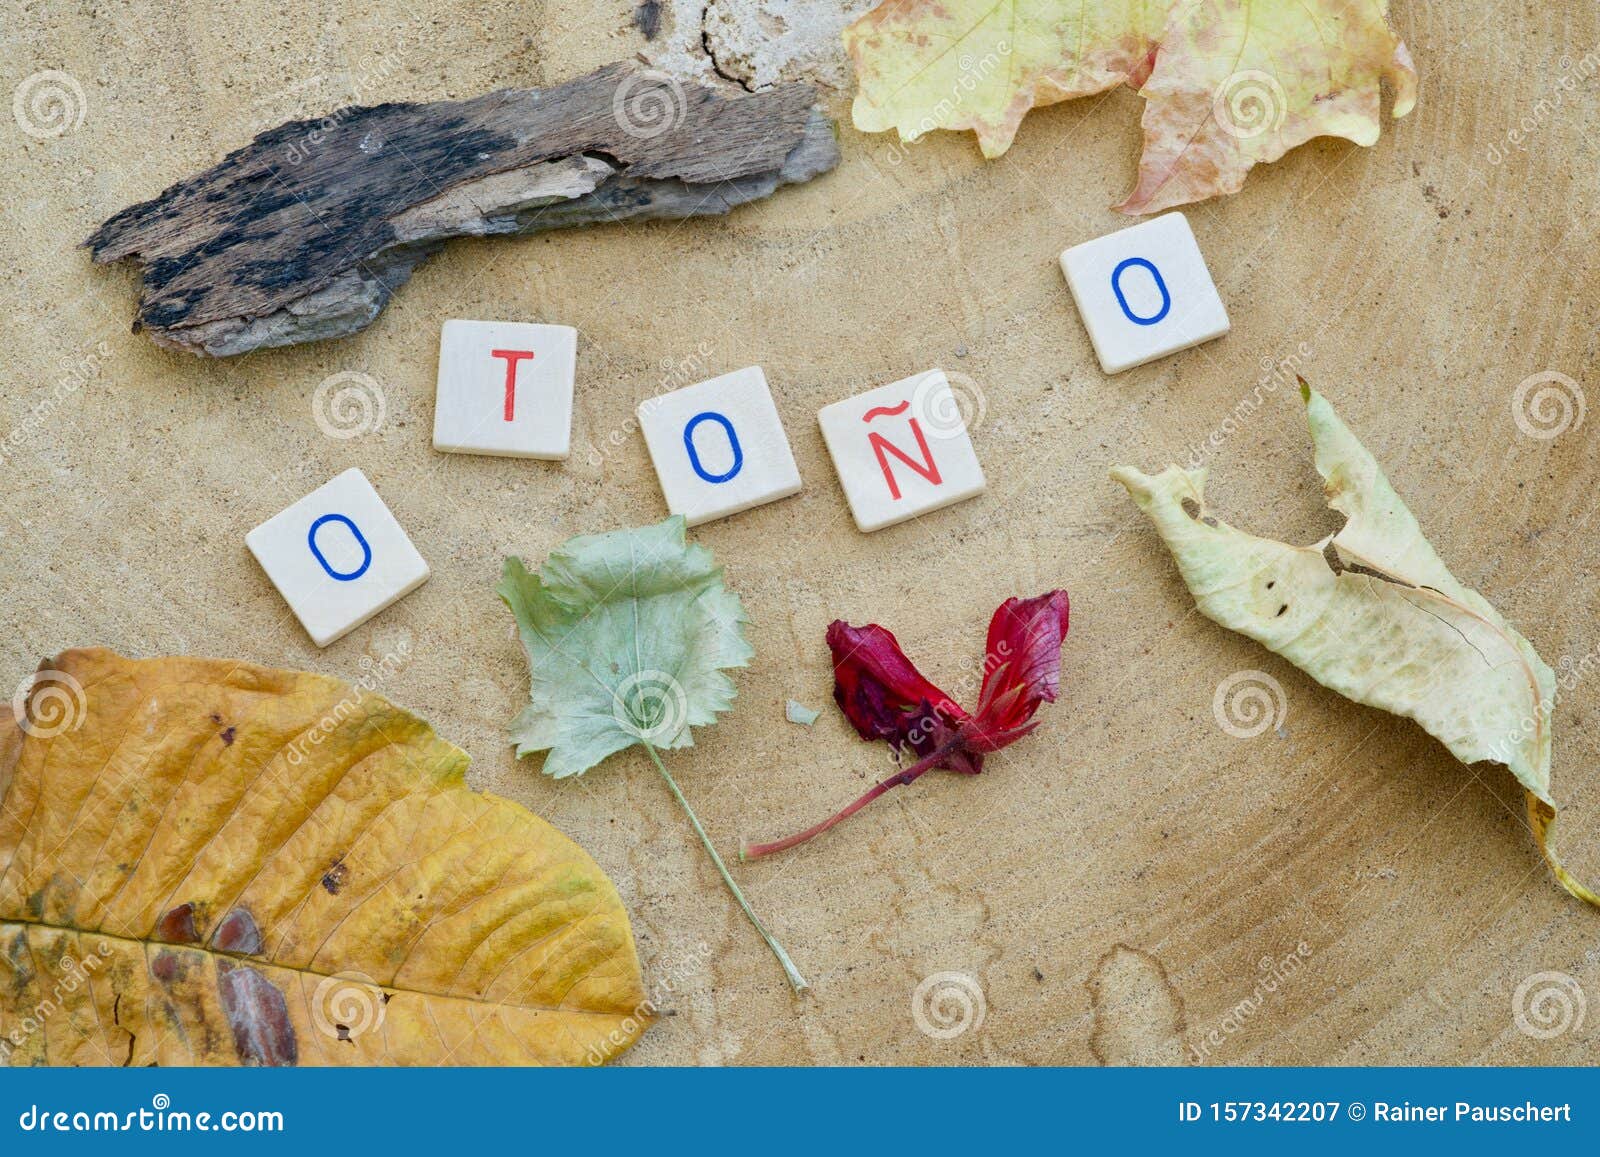 the spanish word otono in letters